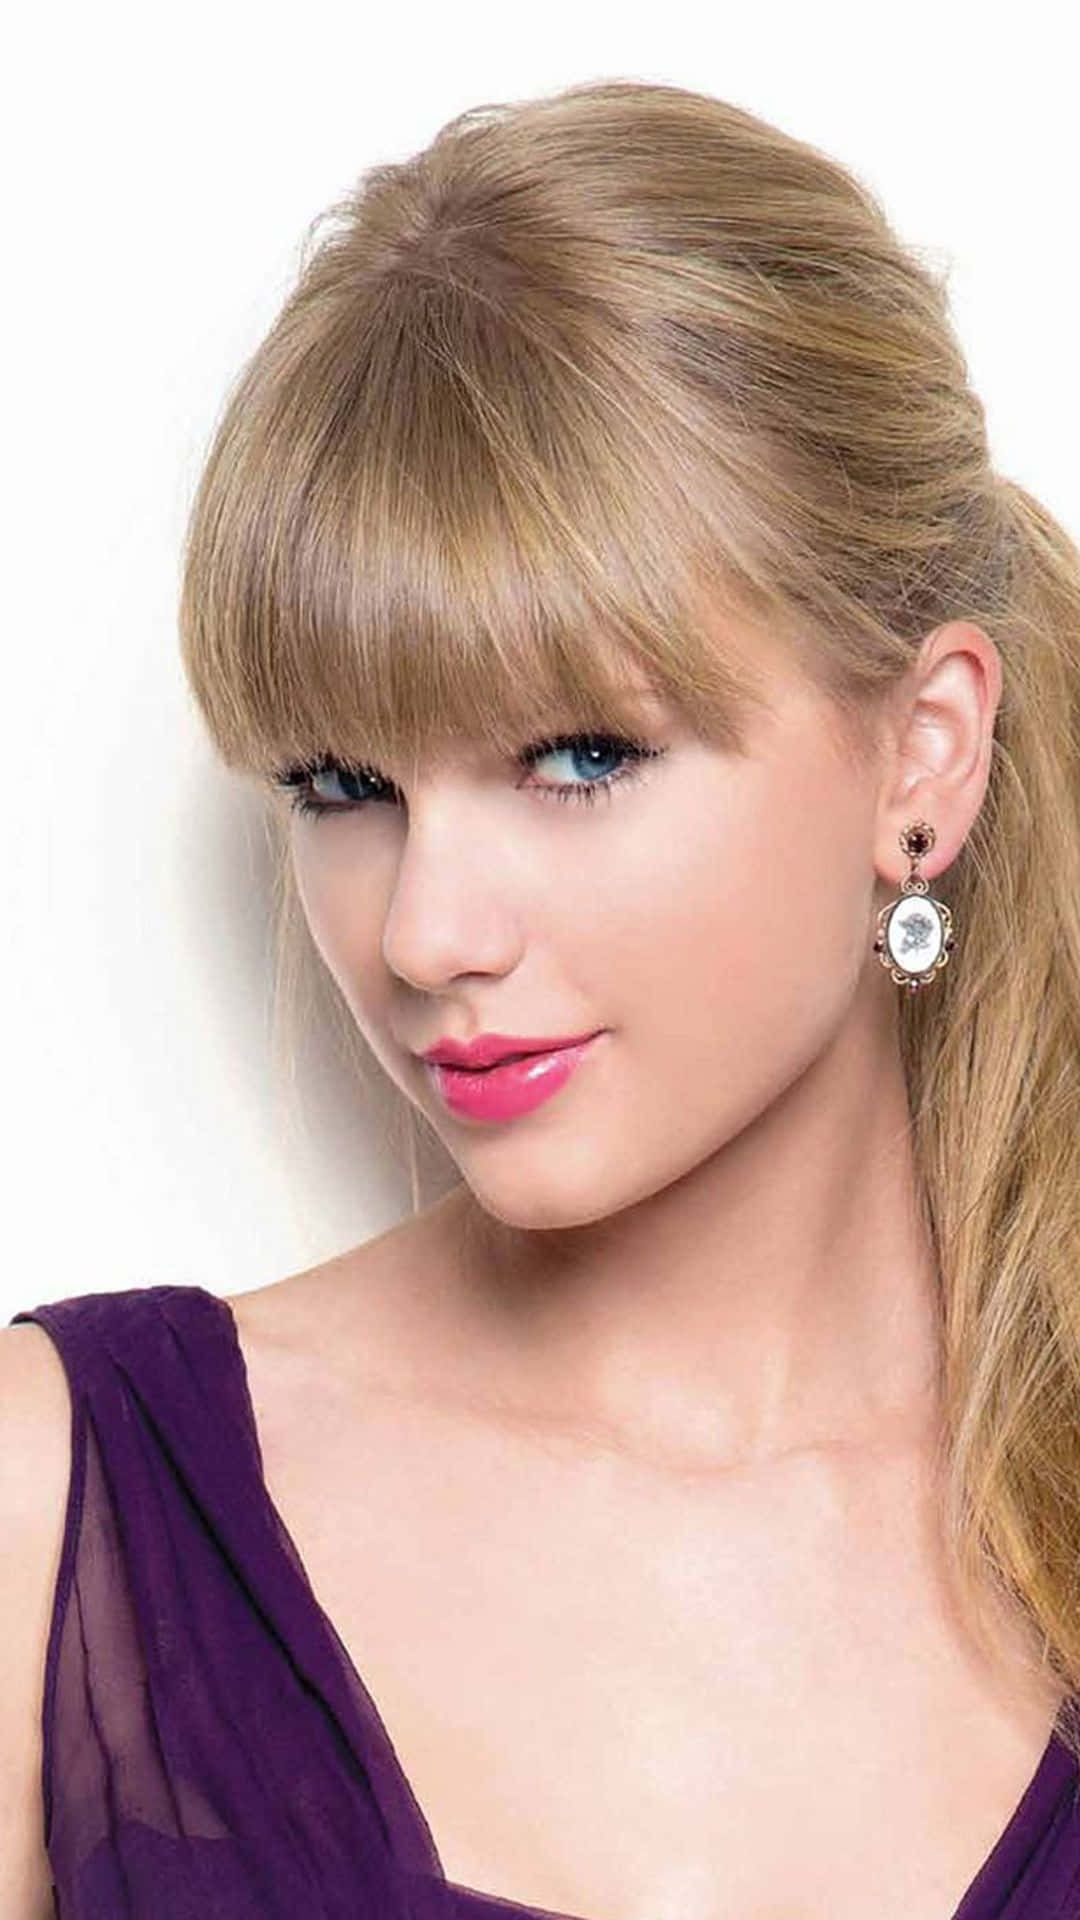 taylor swift smiling